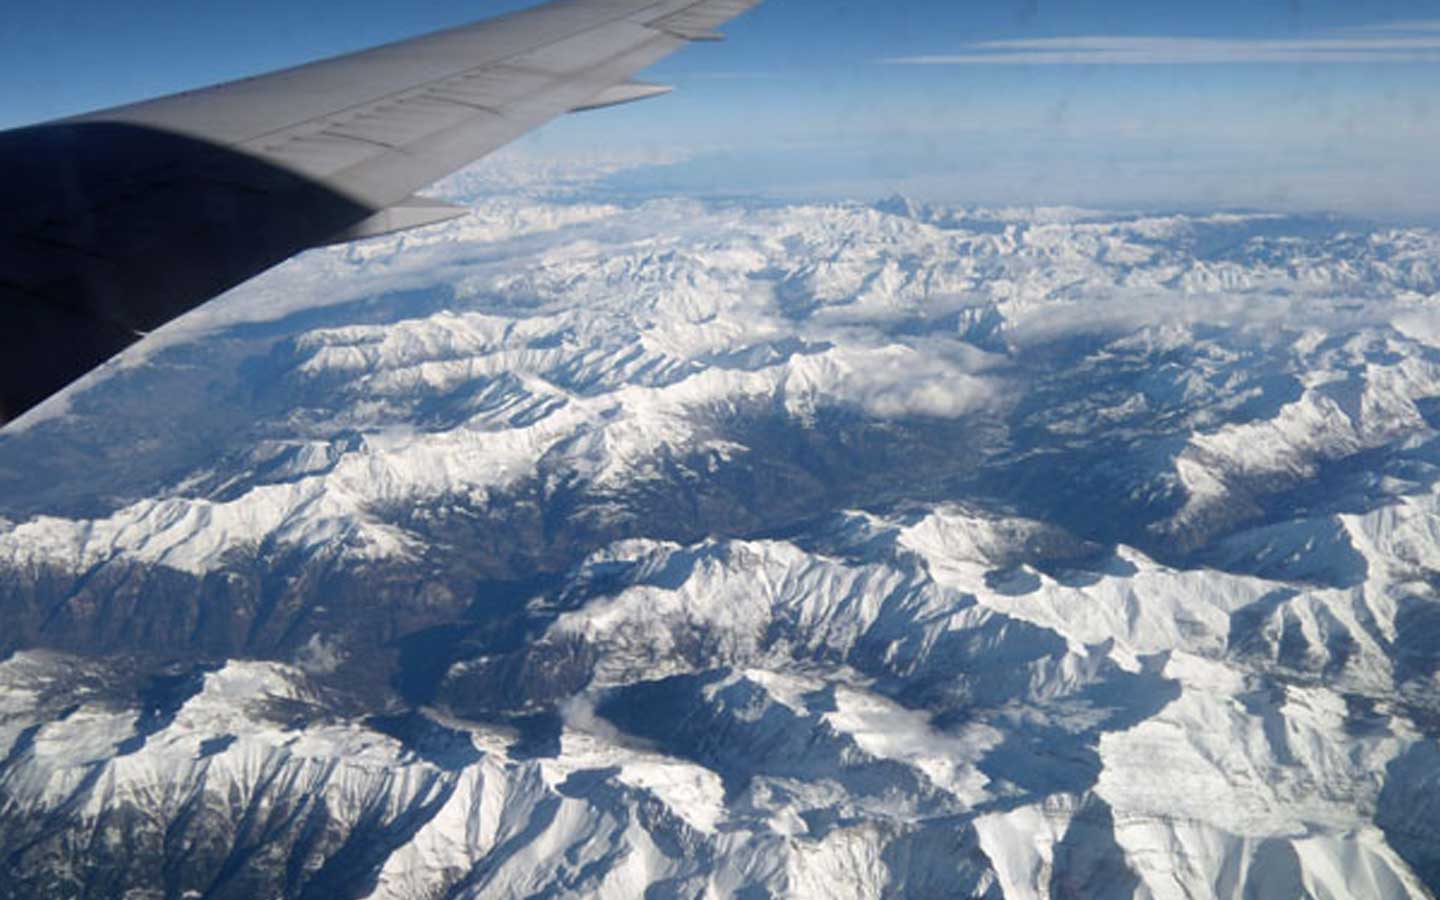 View of Alps from plane window